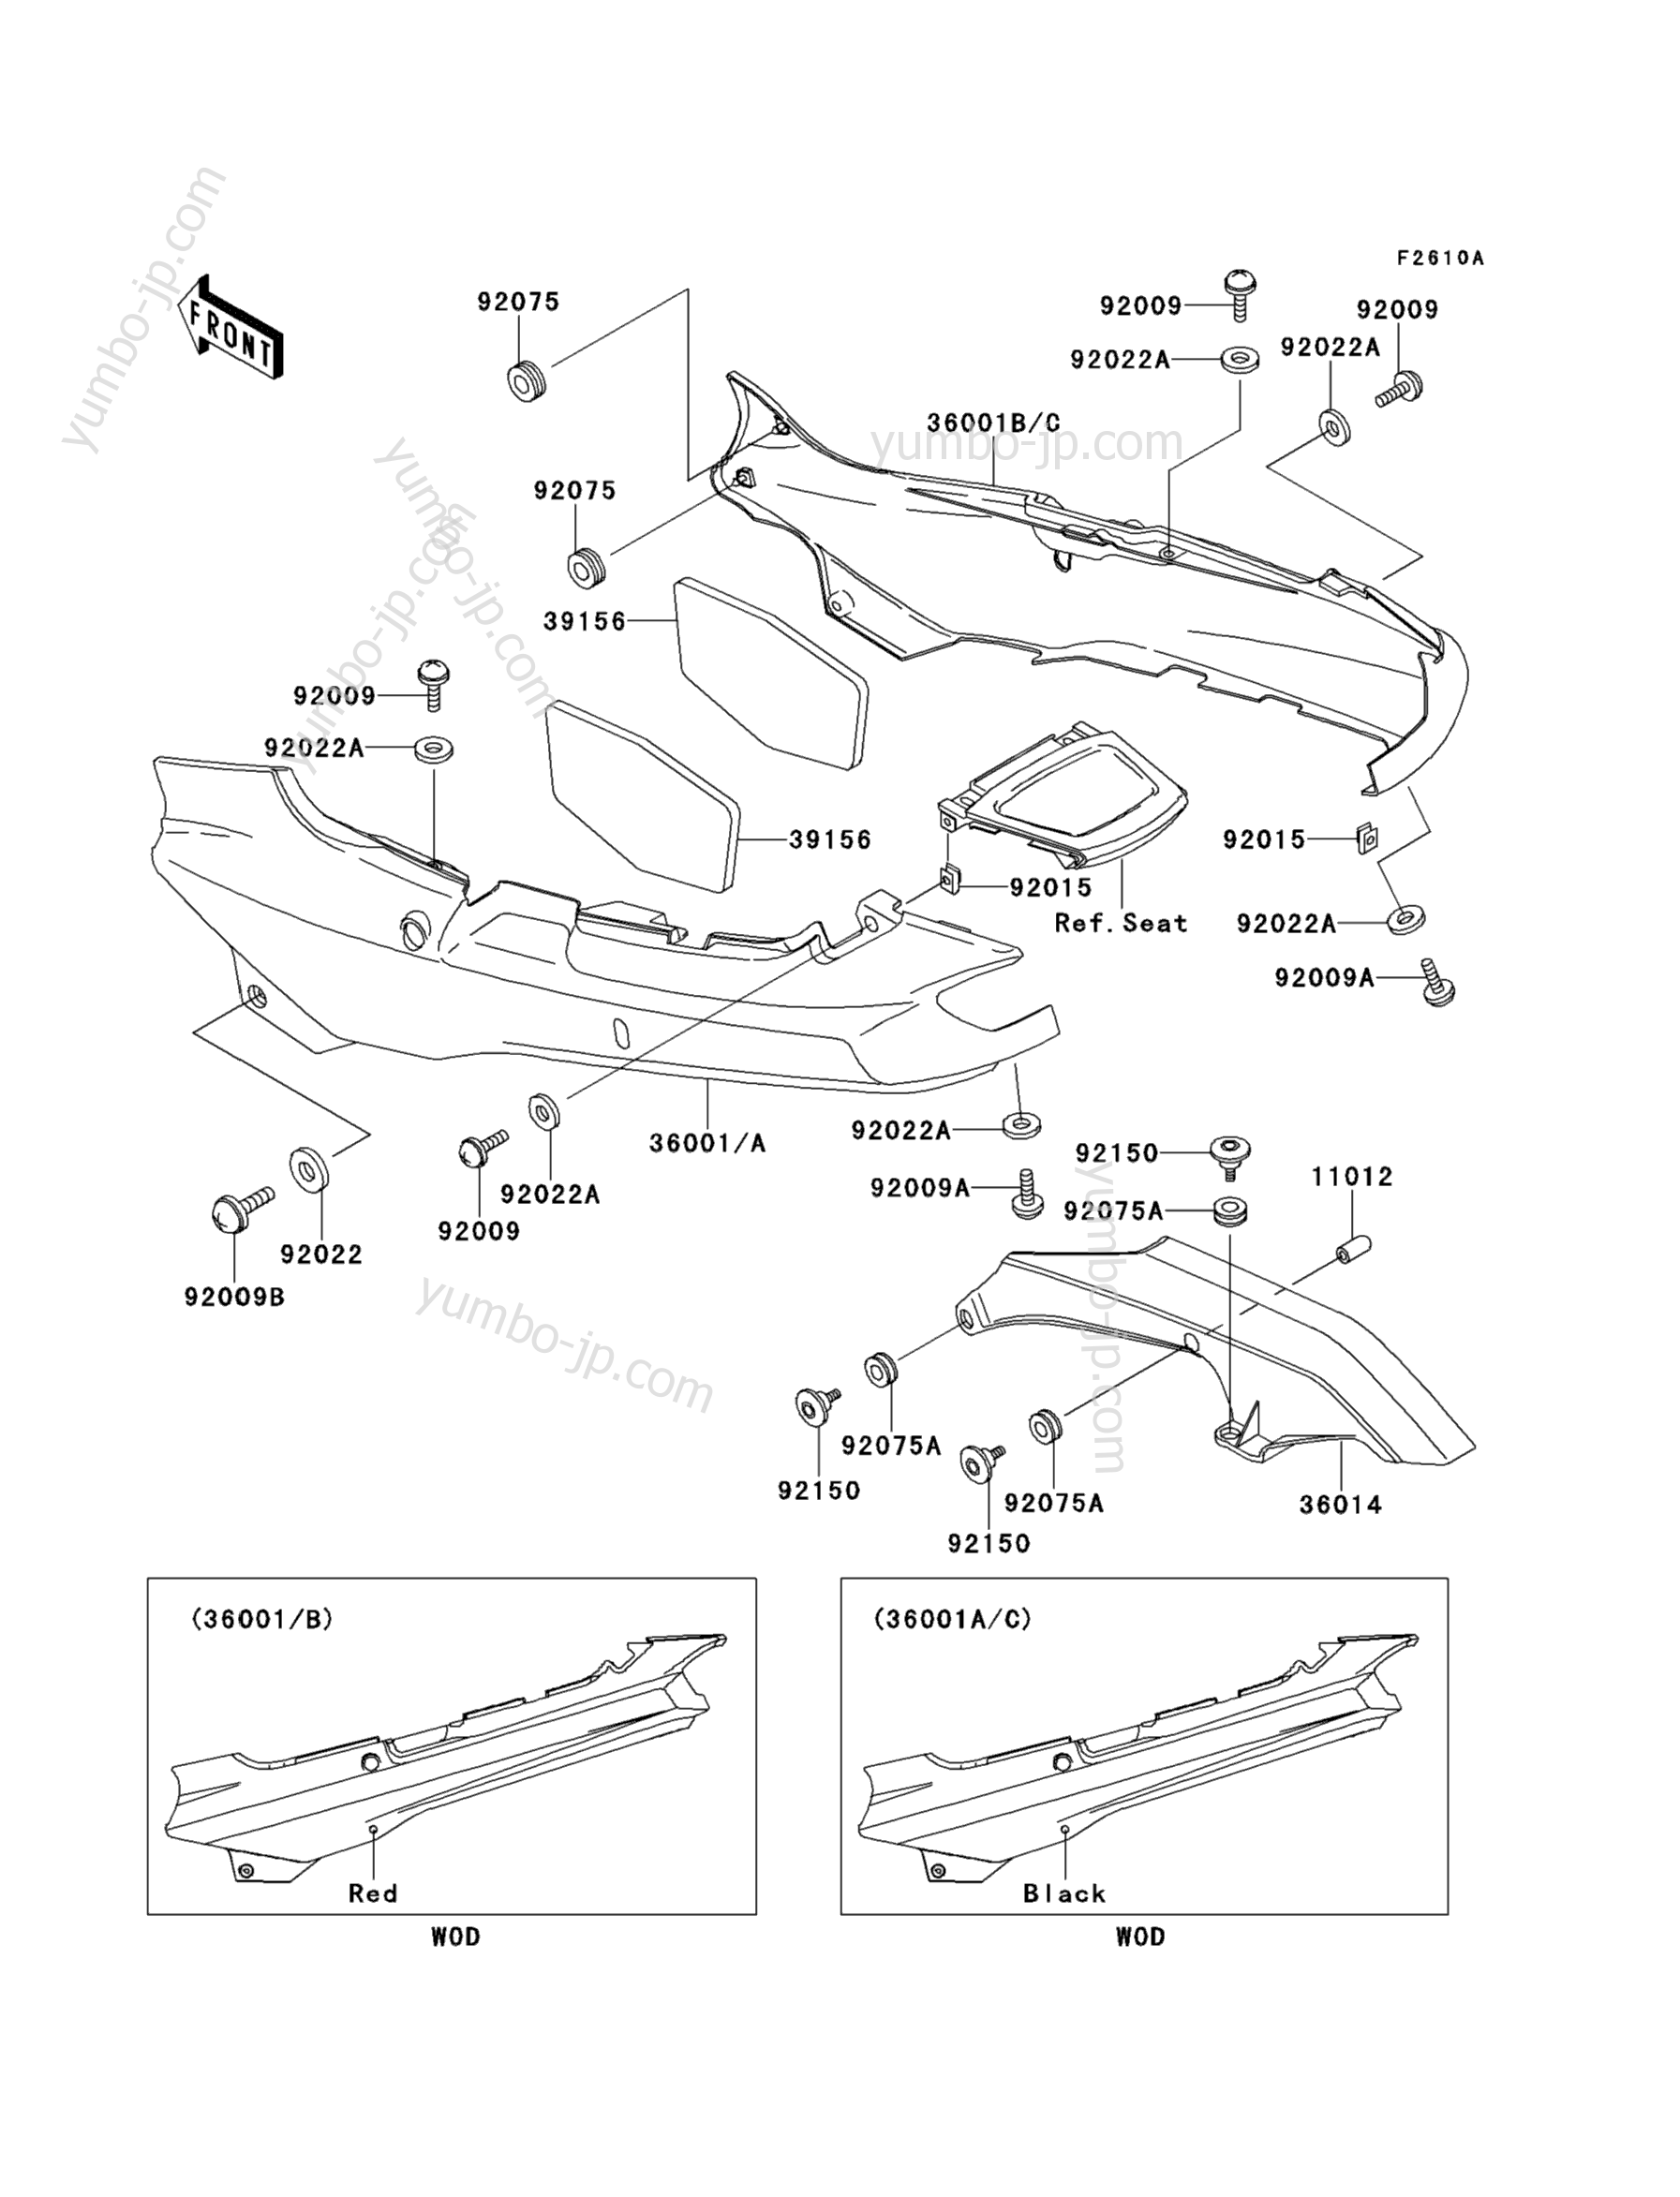 Side Covers/Chain Cover(ZX1100-E2/E3) for motorcycles KAWASAKI GPZ1100 (ZX1100-E2) 1996 year